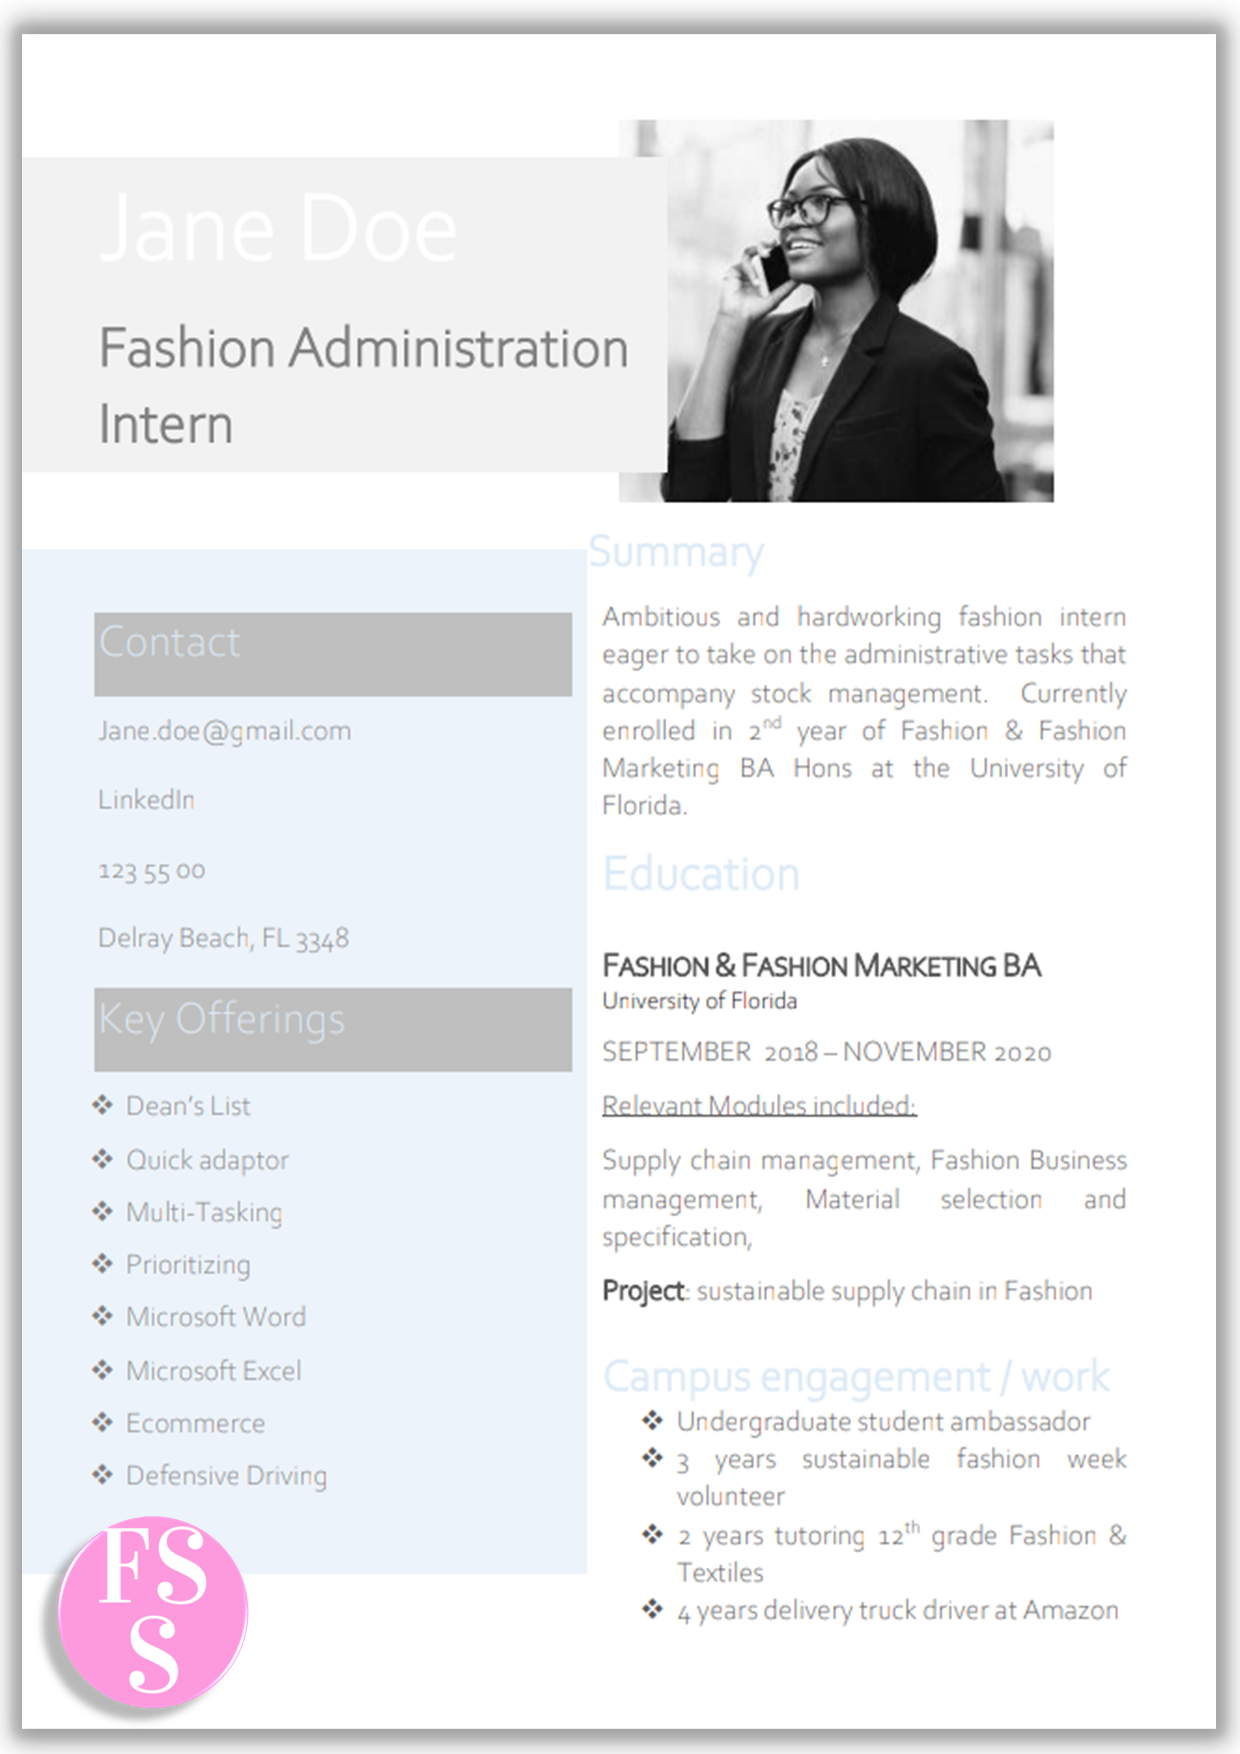 Fashion Student Resume Example: Template + Matching Cover Letter… Need creative cv ideas? This light blue resume was crafted to blow recruiters away. 